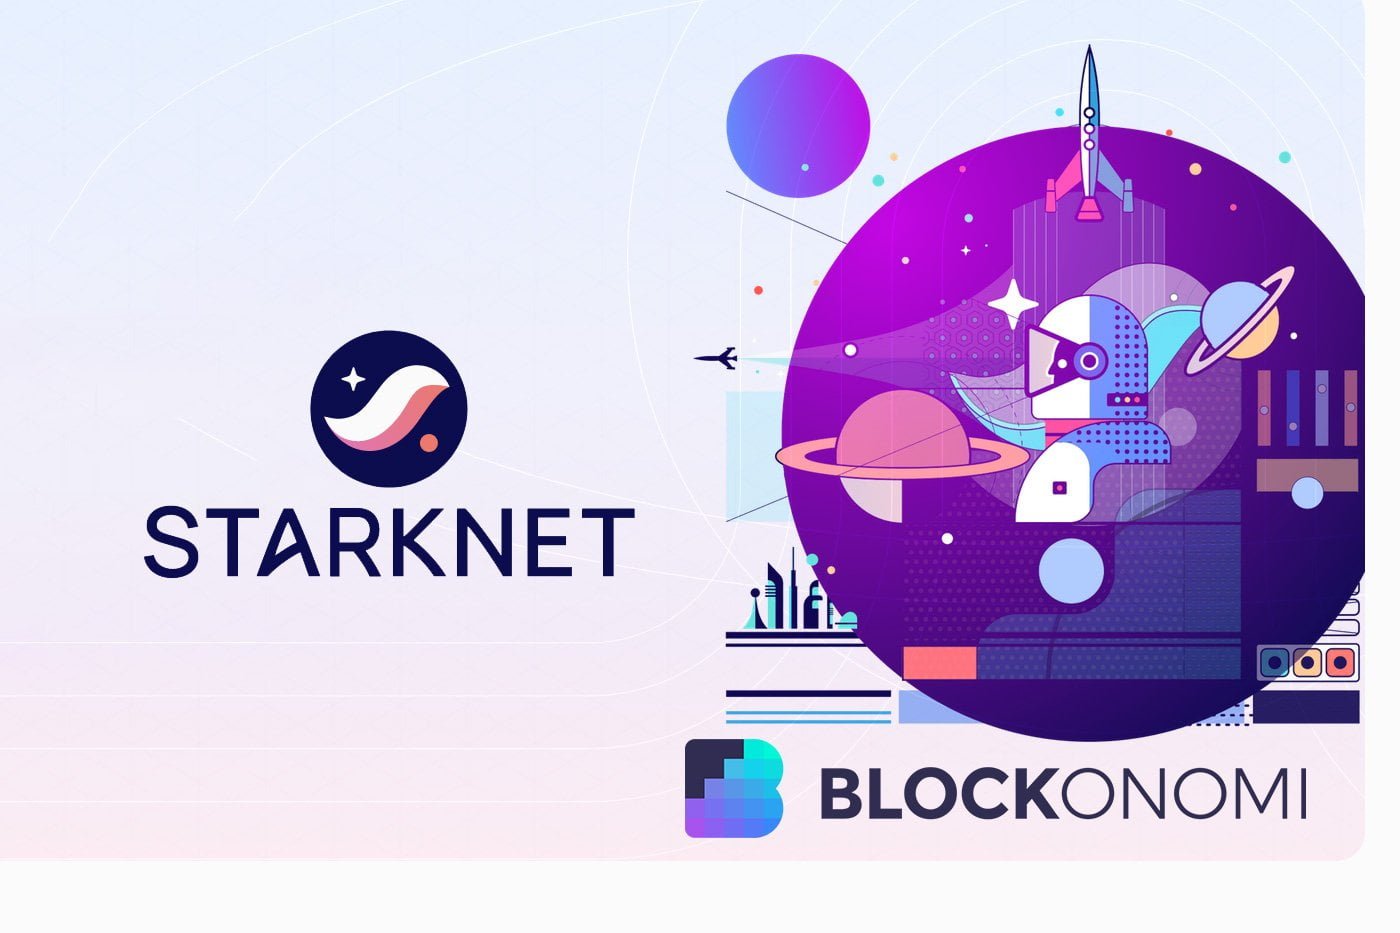 Starknet STRK Rockets to Fourth Largest Ethereum Layer 2 with $1.3B TVL After Chaotic Token Launch